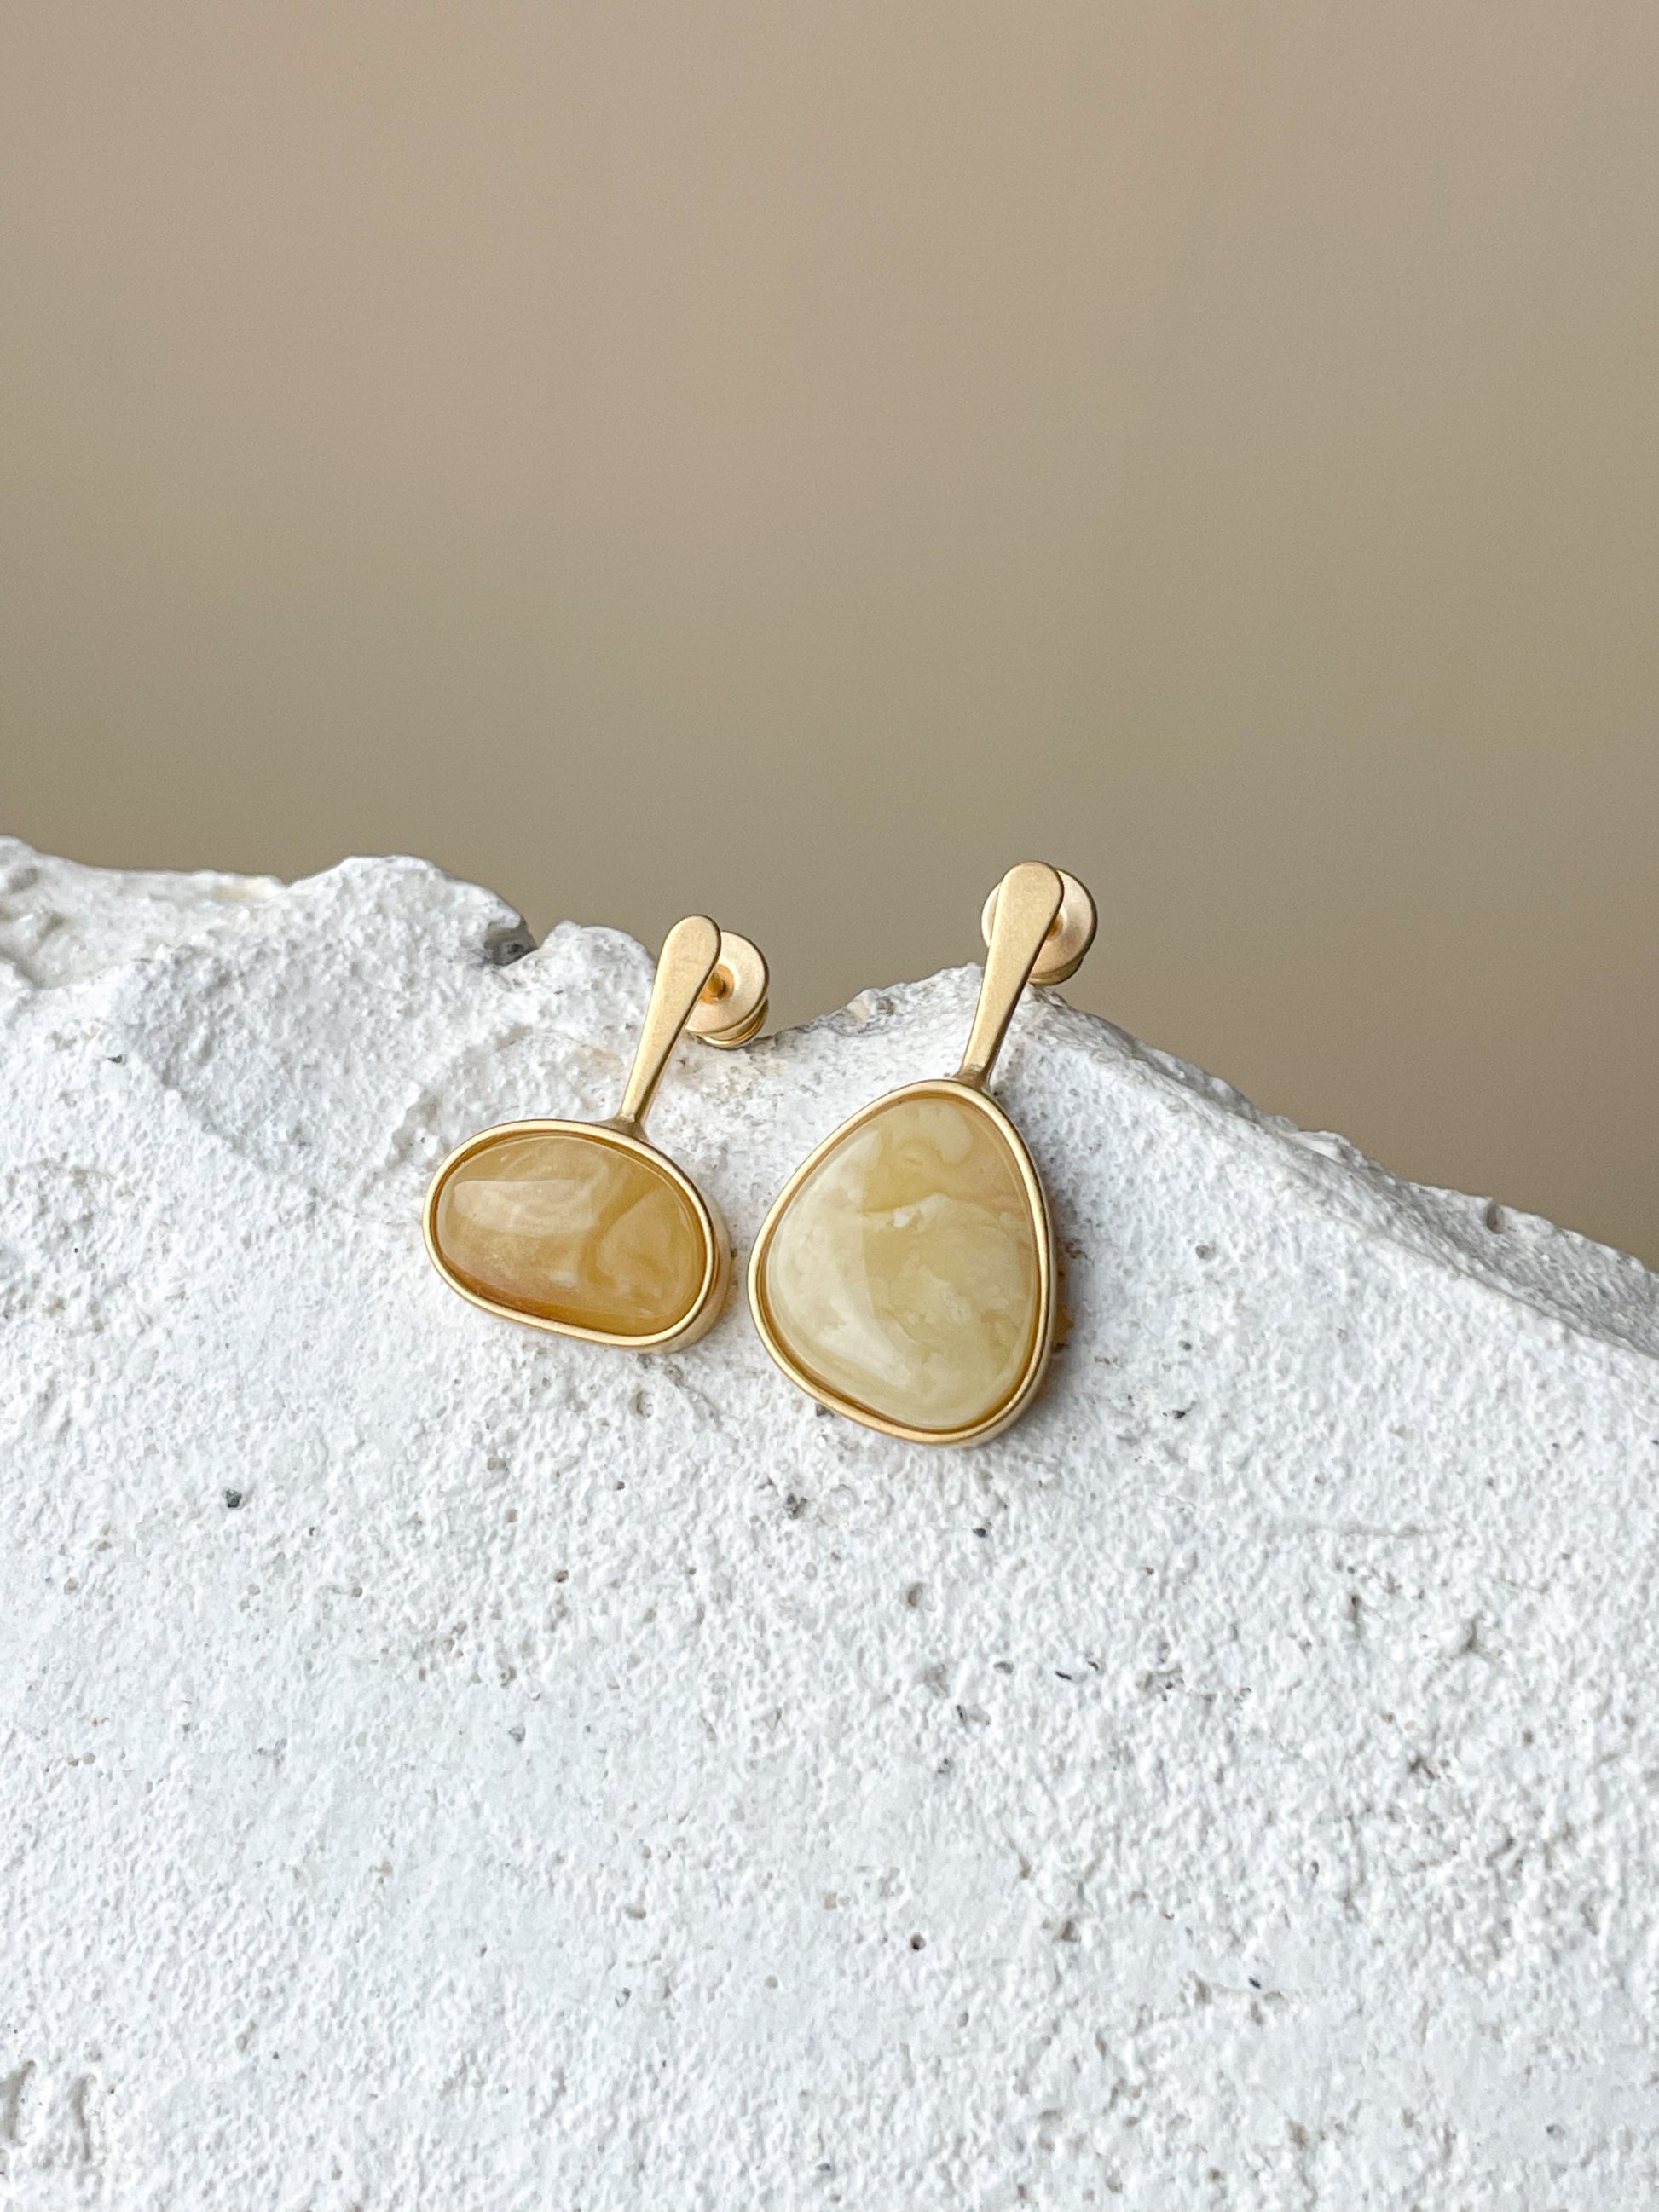 Matte amber stud earrings - Gold plated silver - Mismatched earrings collection